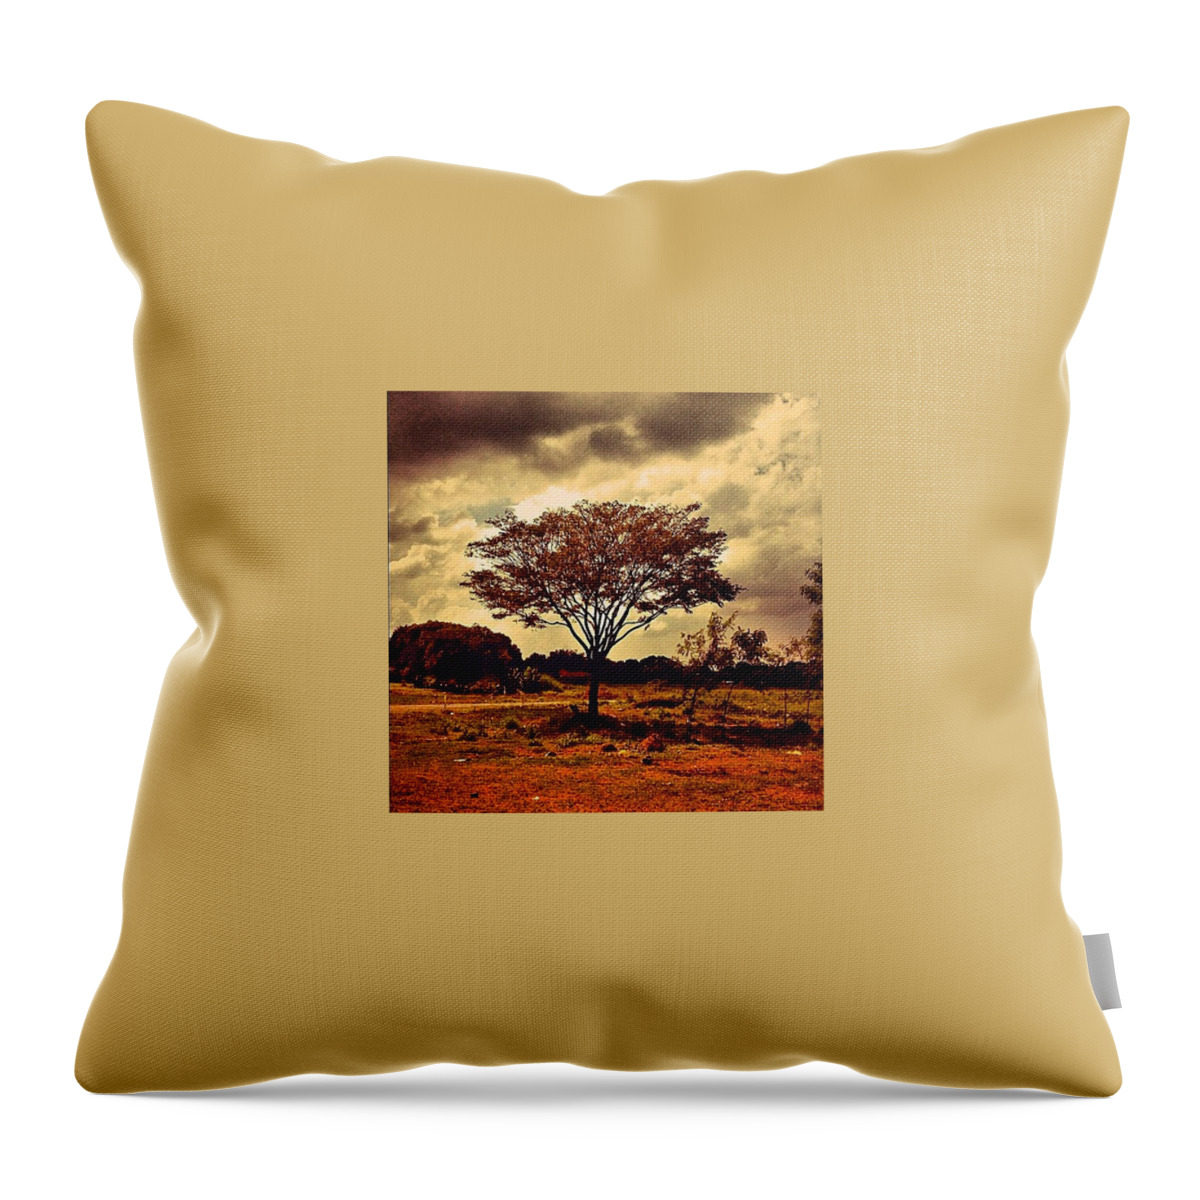 Vintage Throw Pillow featuring the photograph He Who Plants A Tree, Plants A Hope by Teffie Dela Cruz